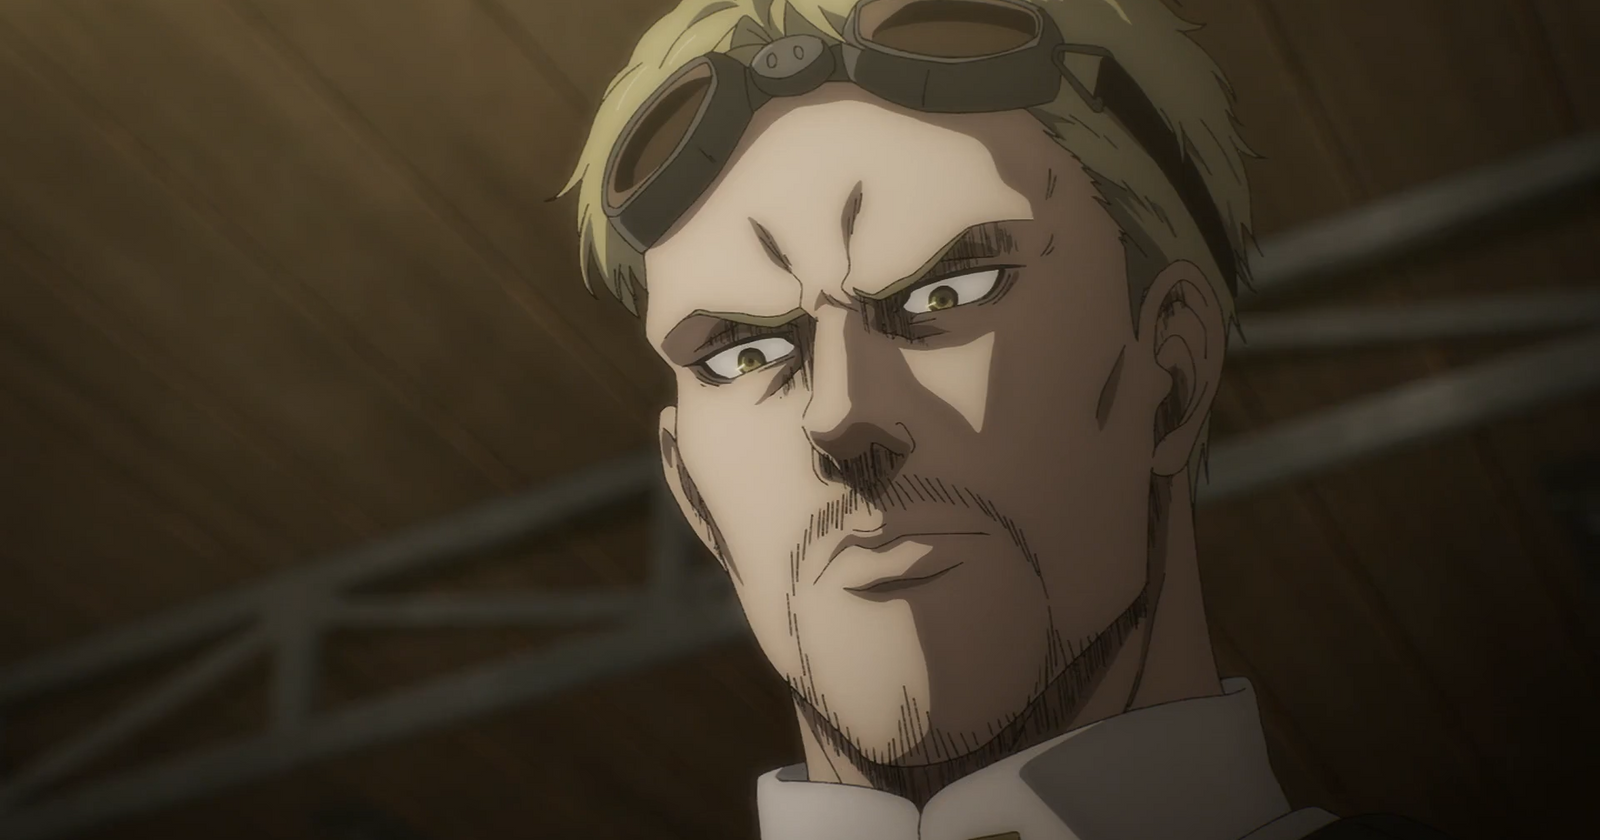 Attack on Titan Season 4: Here's What Reiner Truly Feels About Eren